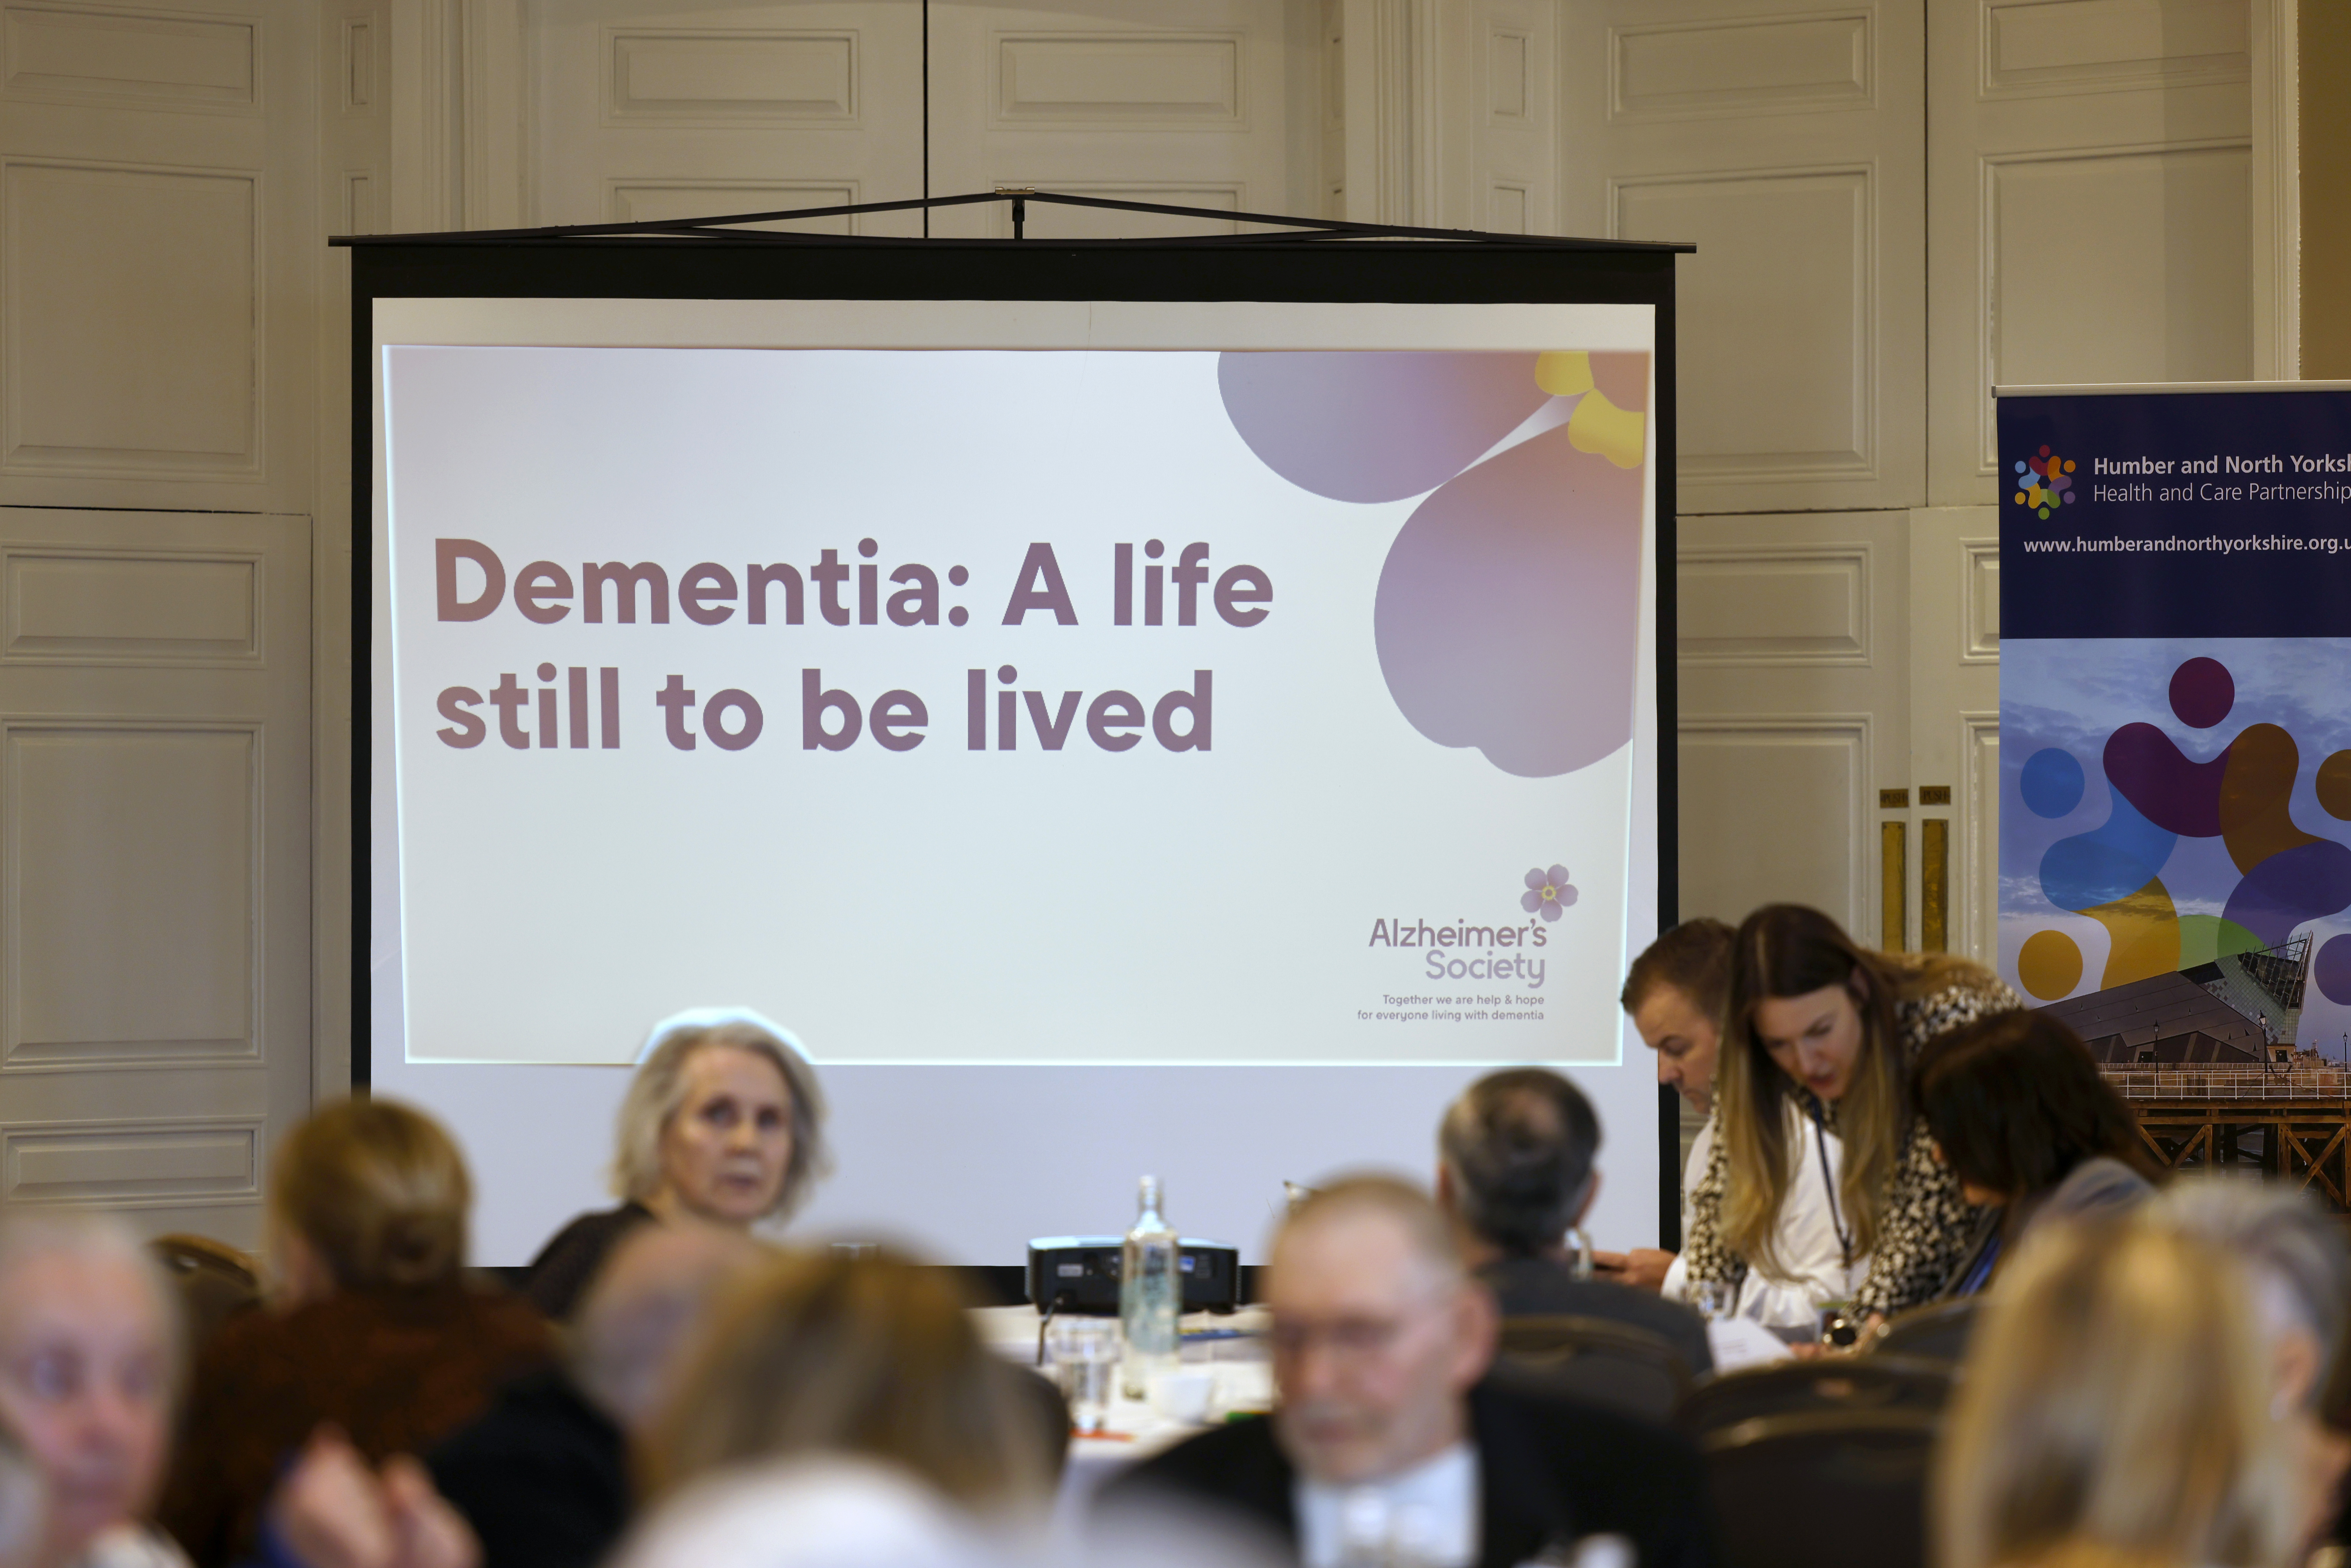 Picture of people at the conference with the presentation slide titled 'Dementia: A life still to be lived' in the background